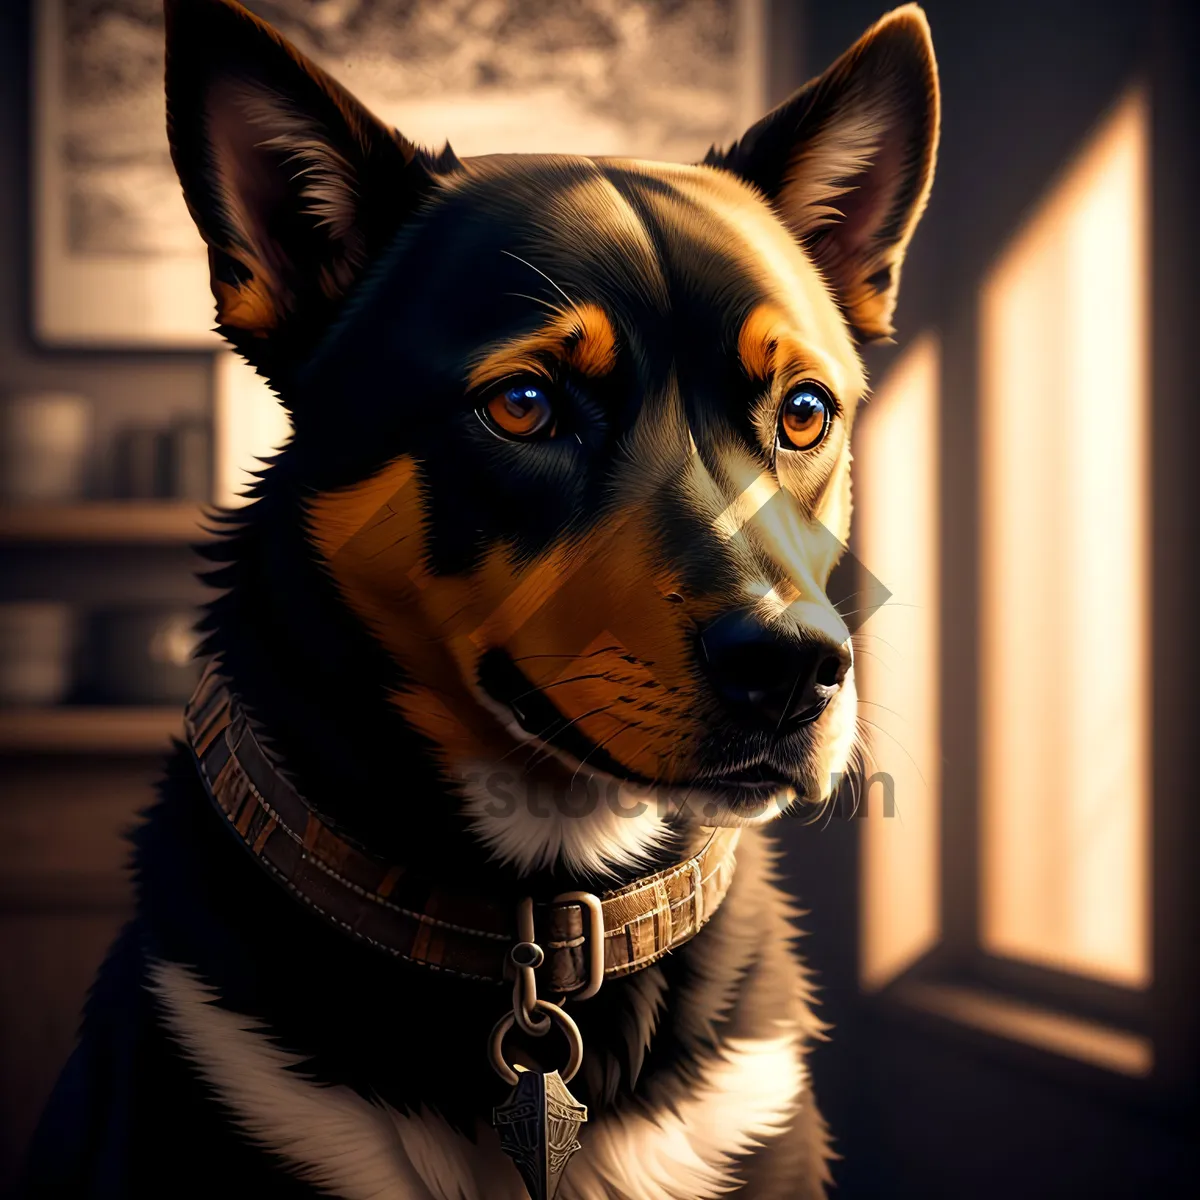 Picture of Adorable Shepherd Dog: A Loyal and Beautiful Canine Companion